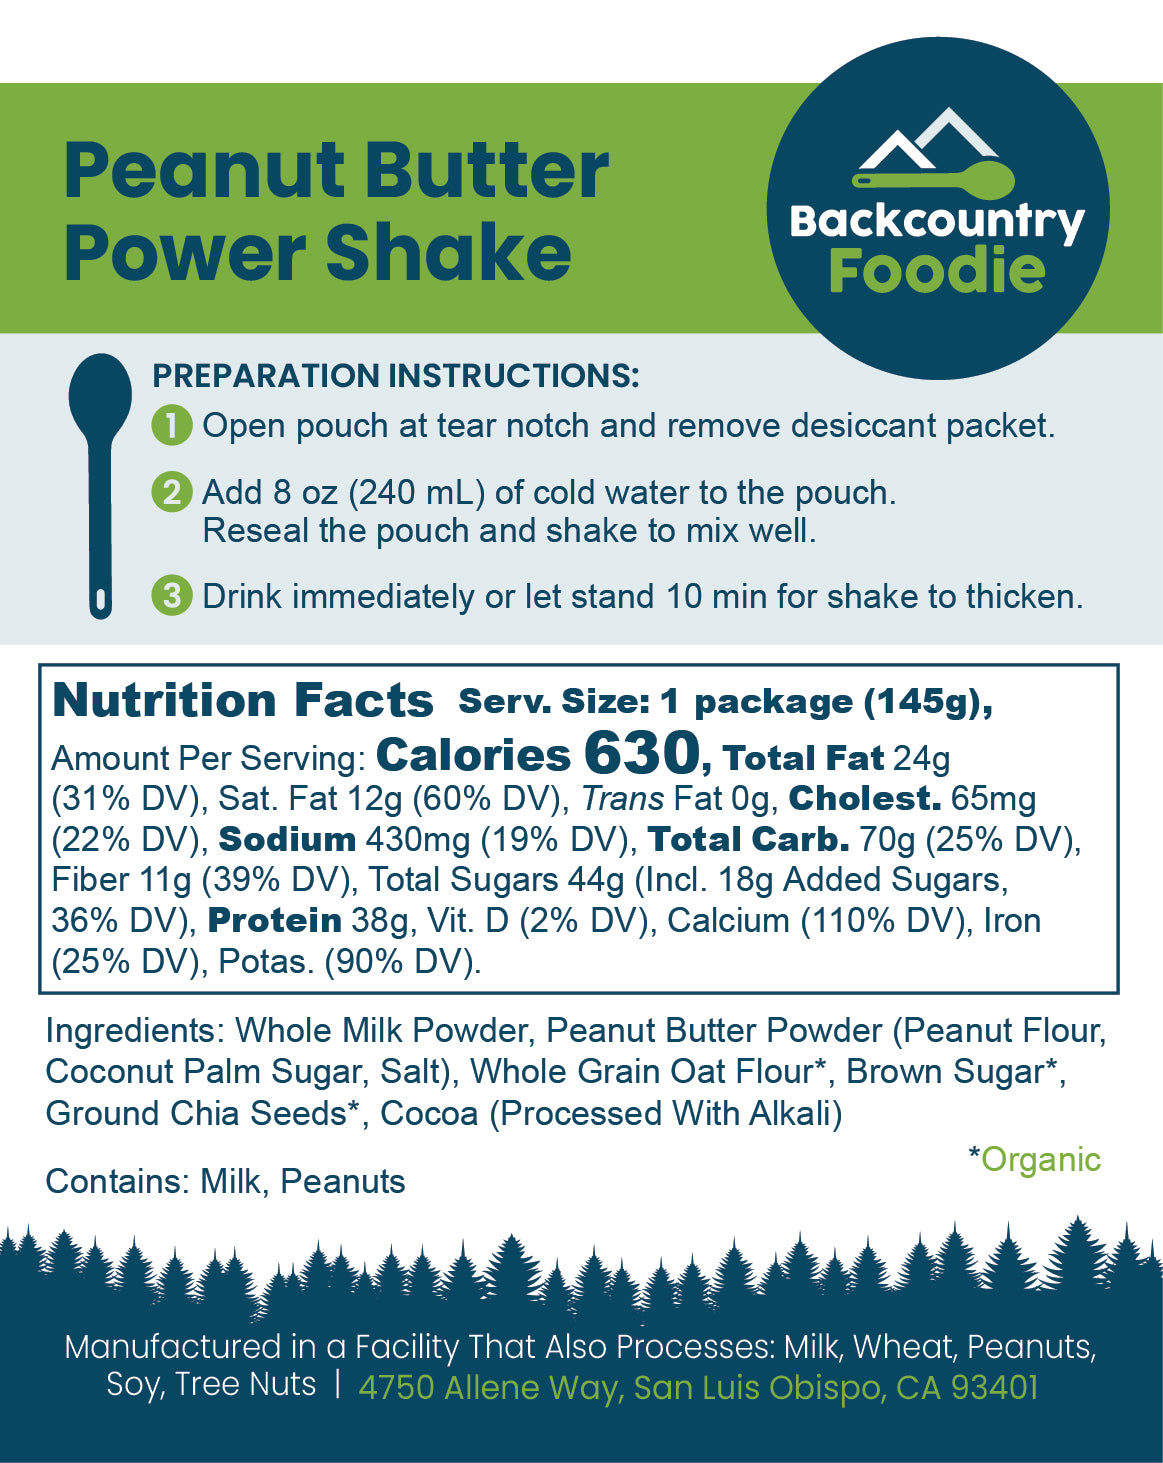 Backcountry Foodie - Peanut Butter Power Shake